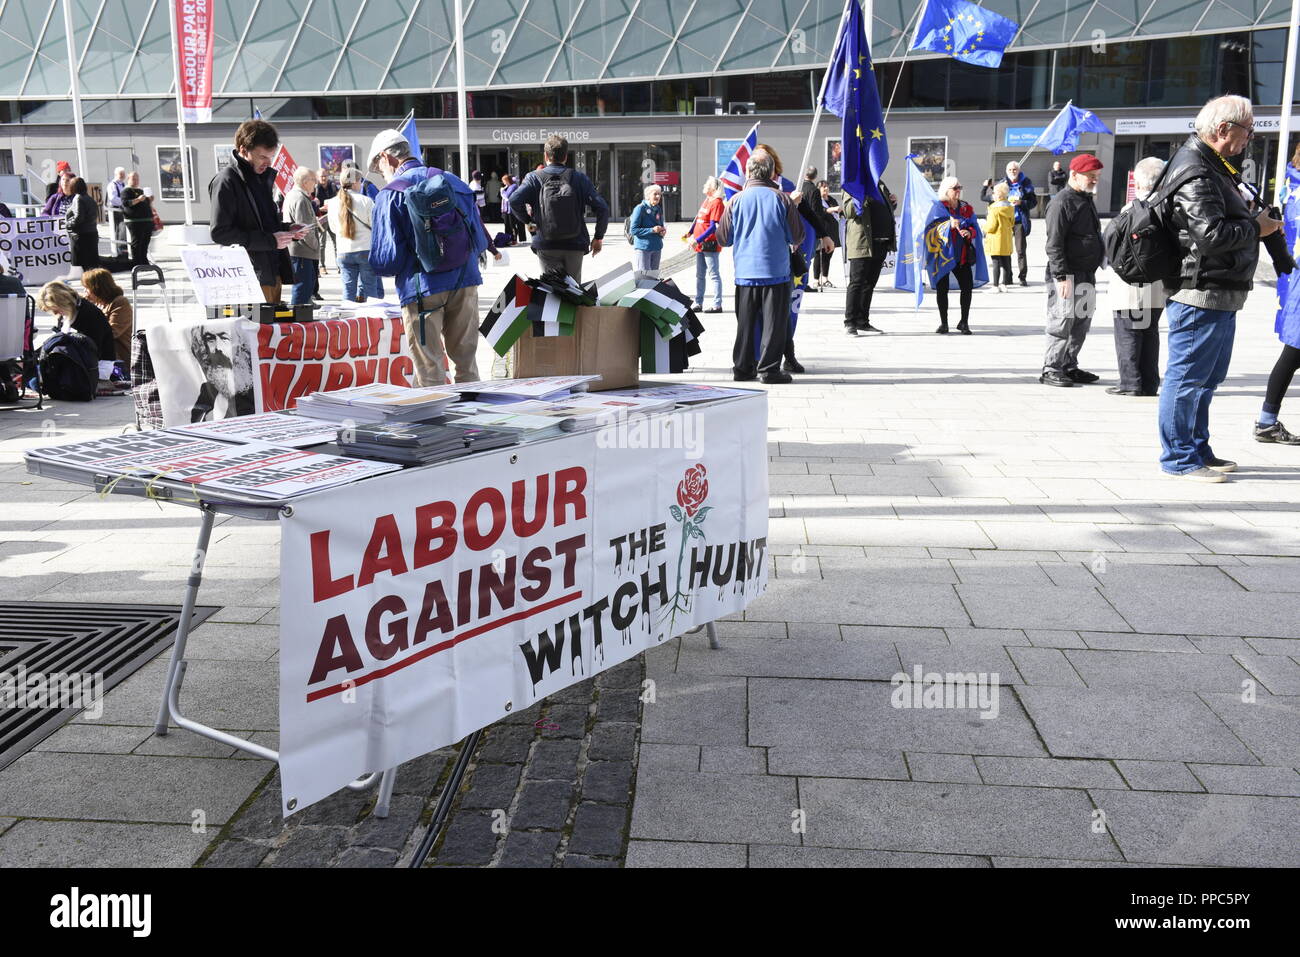 Liverpool, UK, 25th September 2018, Various stalls with flags and placards outside the Echo Arena for the Labour Party Conference. Credit David J Colbran / Alamy Live News Stock Photo